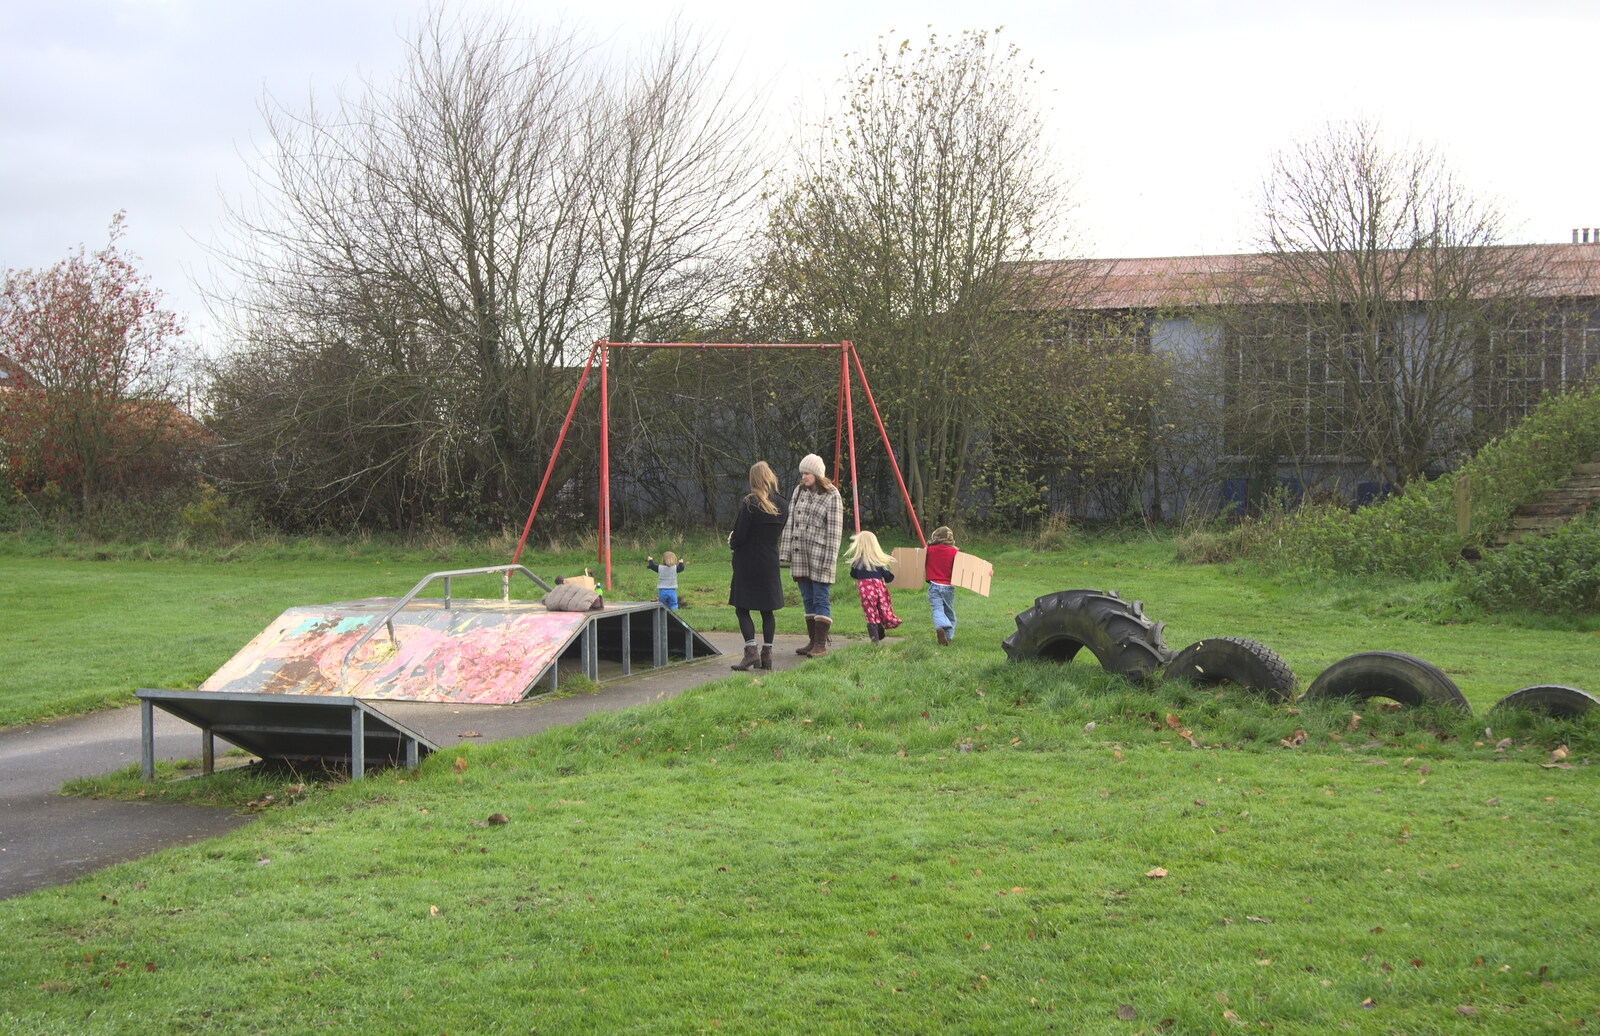 More Building and Palgrave Playground, Suffolk - 24th November 2013: Hannah and Isobel discuss the playground